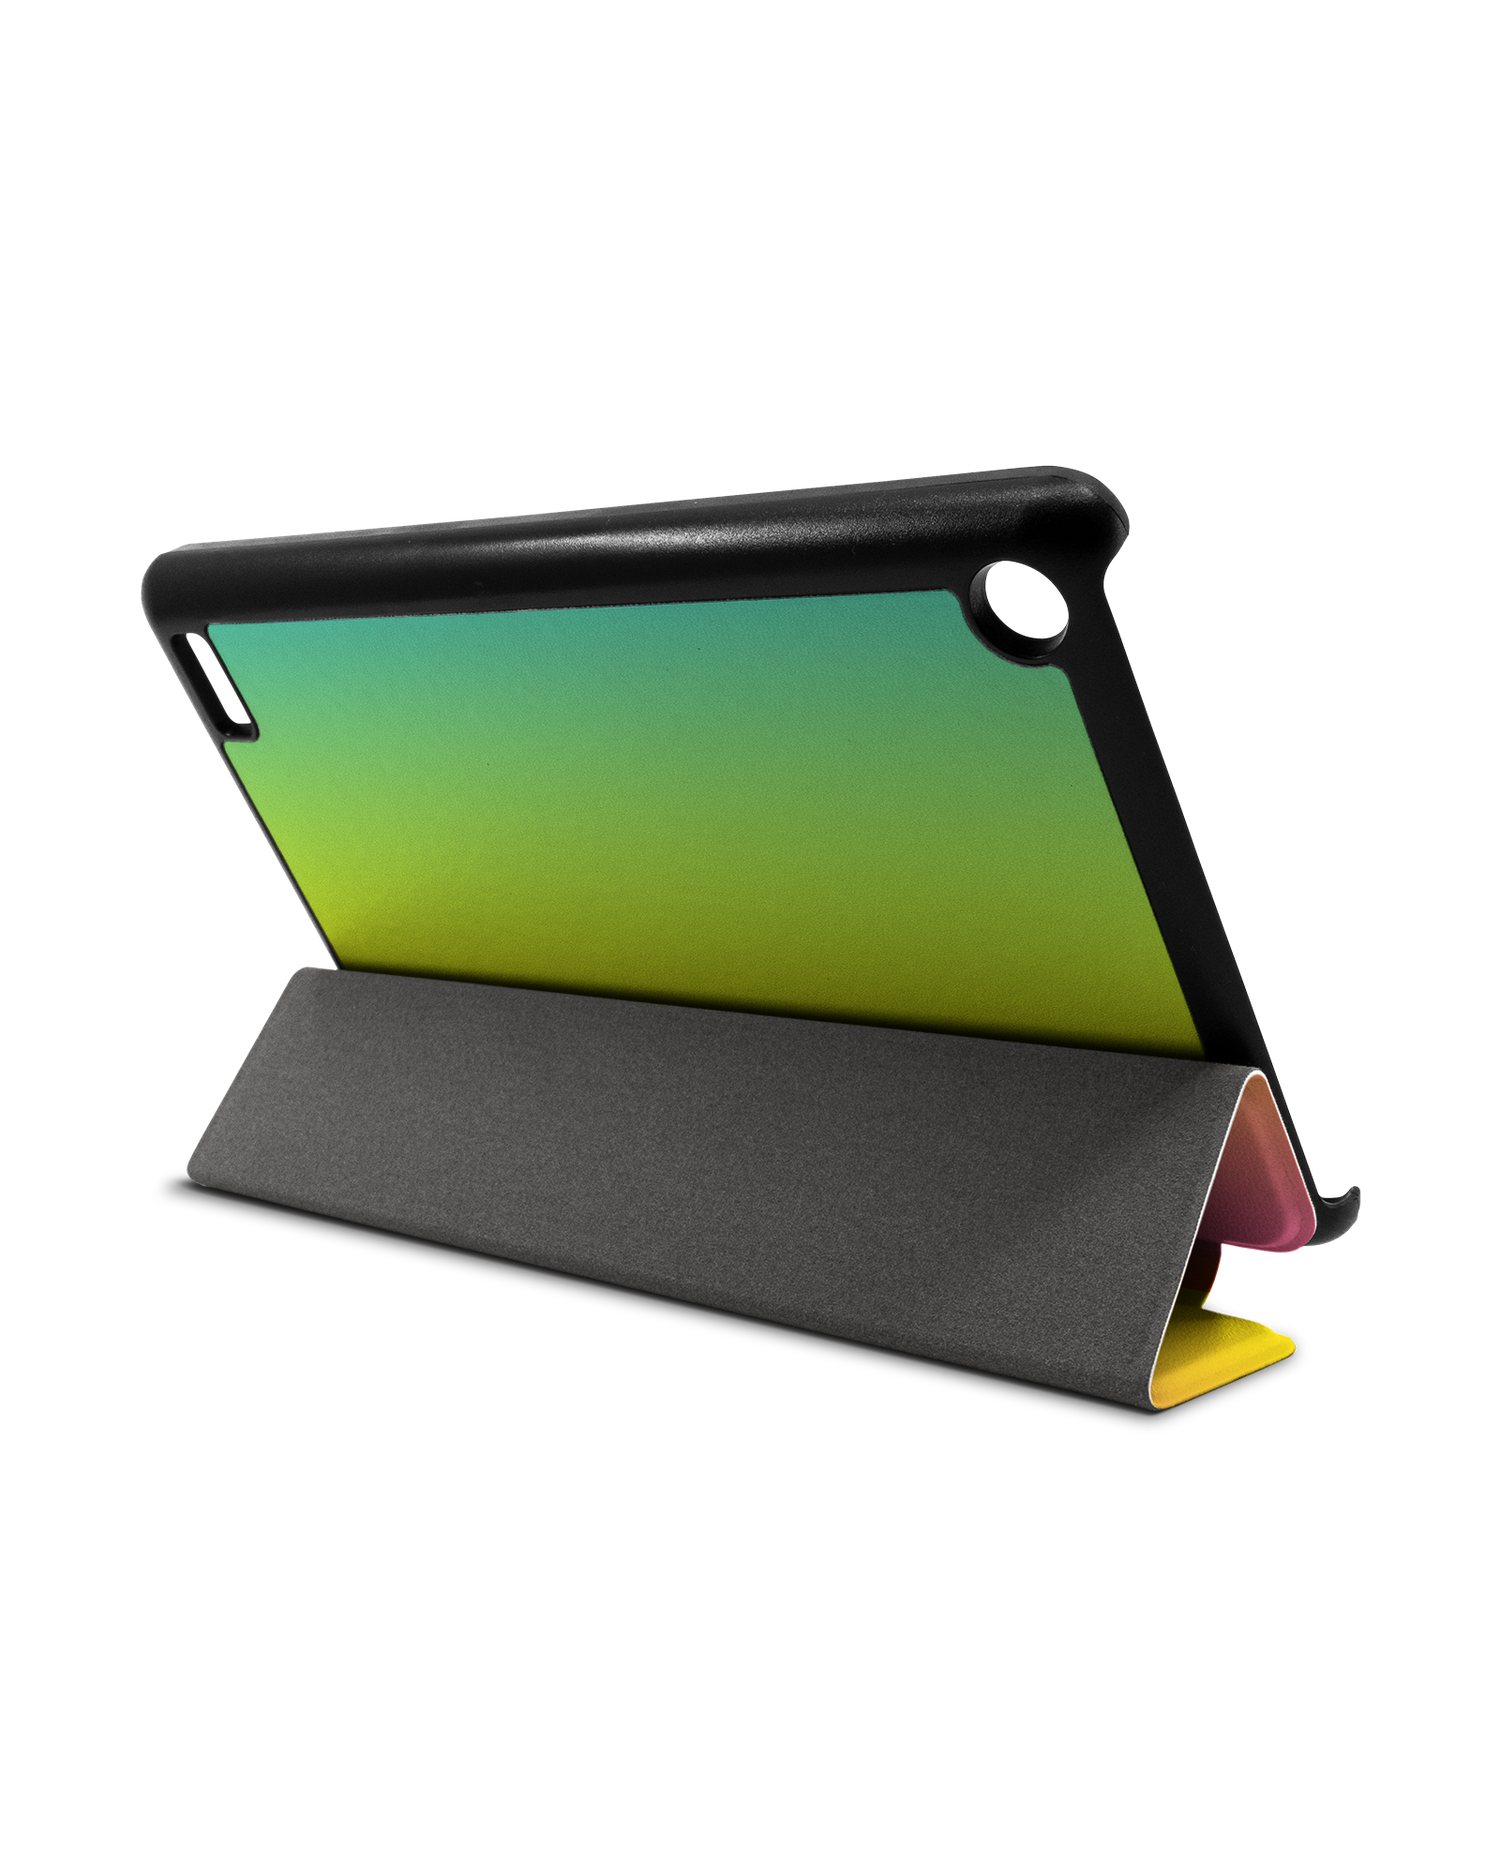 Have A Day Tablet Smart Case for Amazon Fire 7: Used as Stand